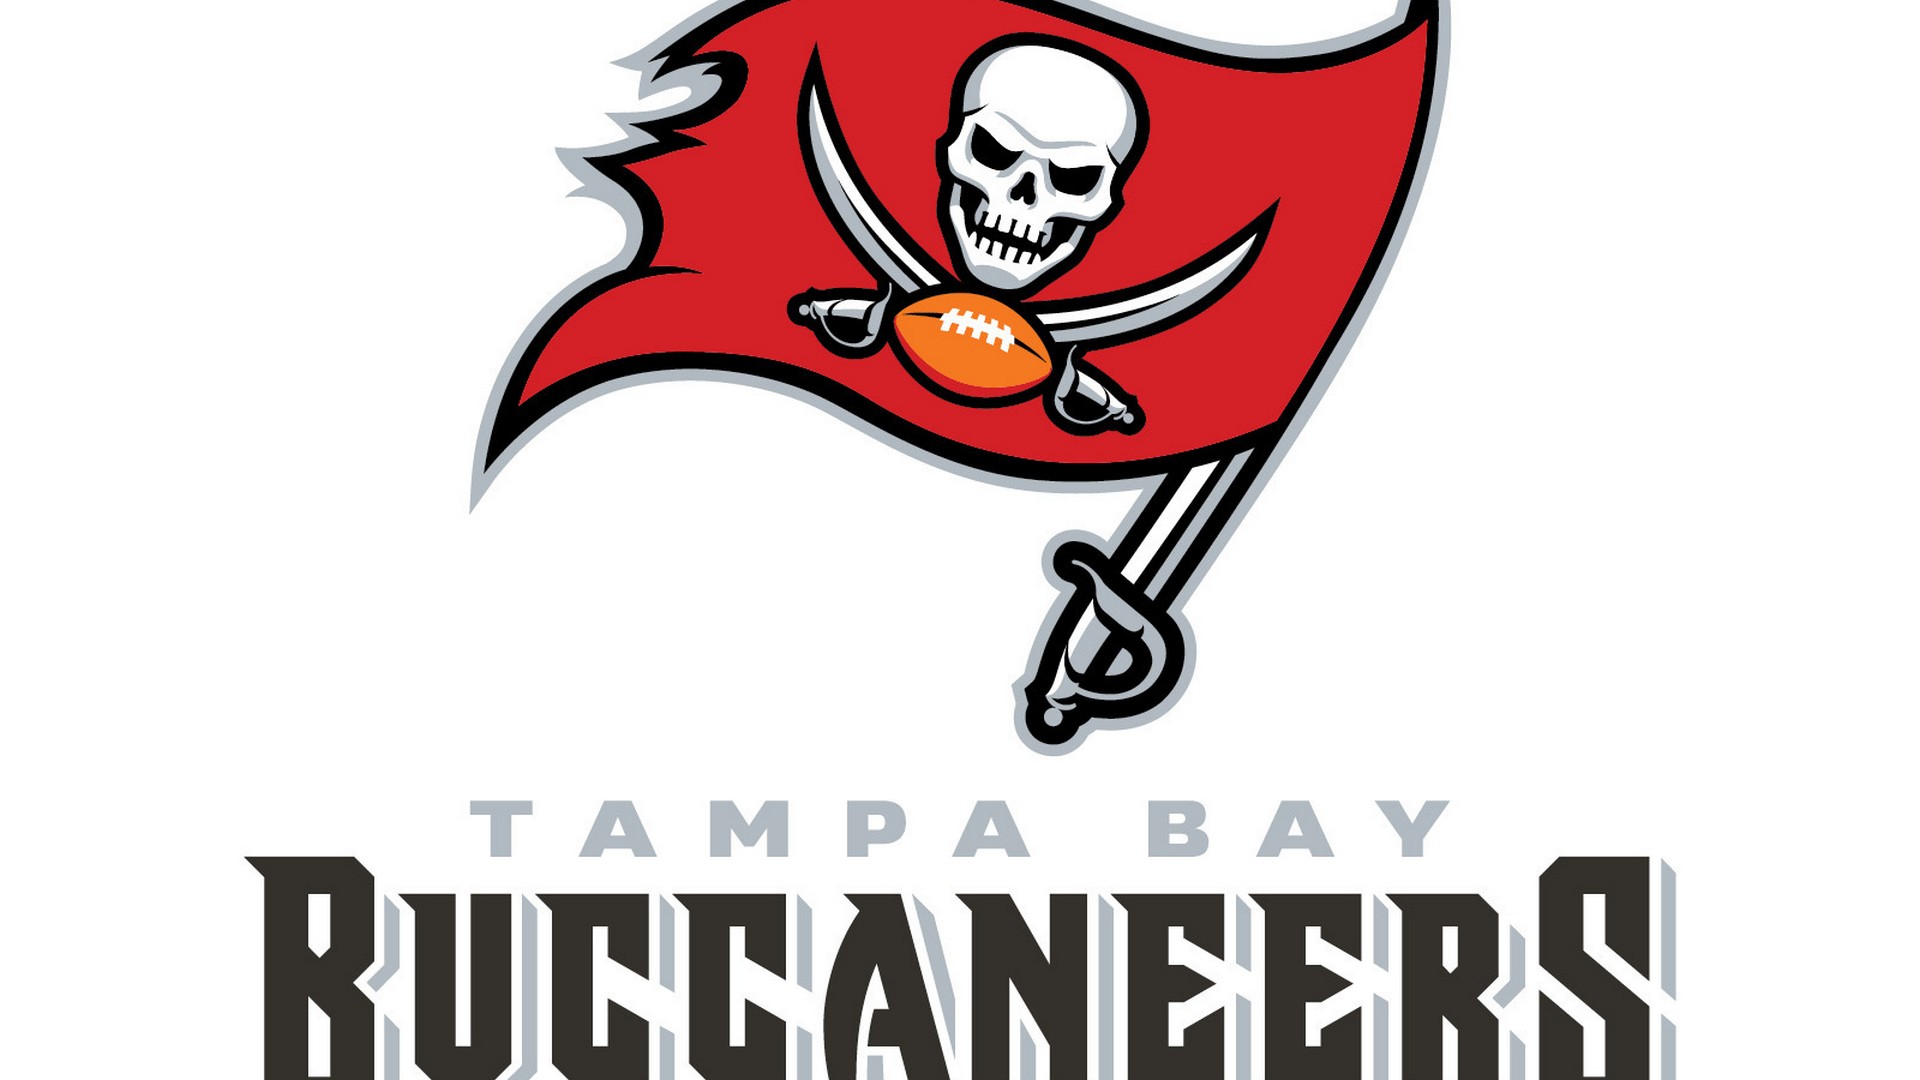 Buccaneers Desktop Backgrounds with high-resolution 1920x1080 pixel. Download and set as wallpaper for Desktop Computer, Apple iPhone X, XS Max, XR, 8, 7, 6, SE, iPad, Android